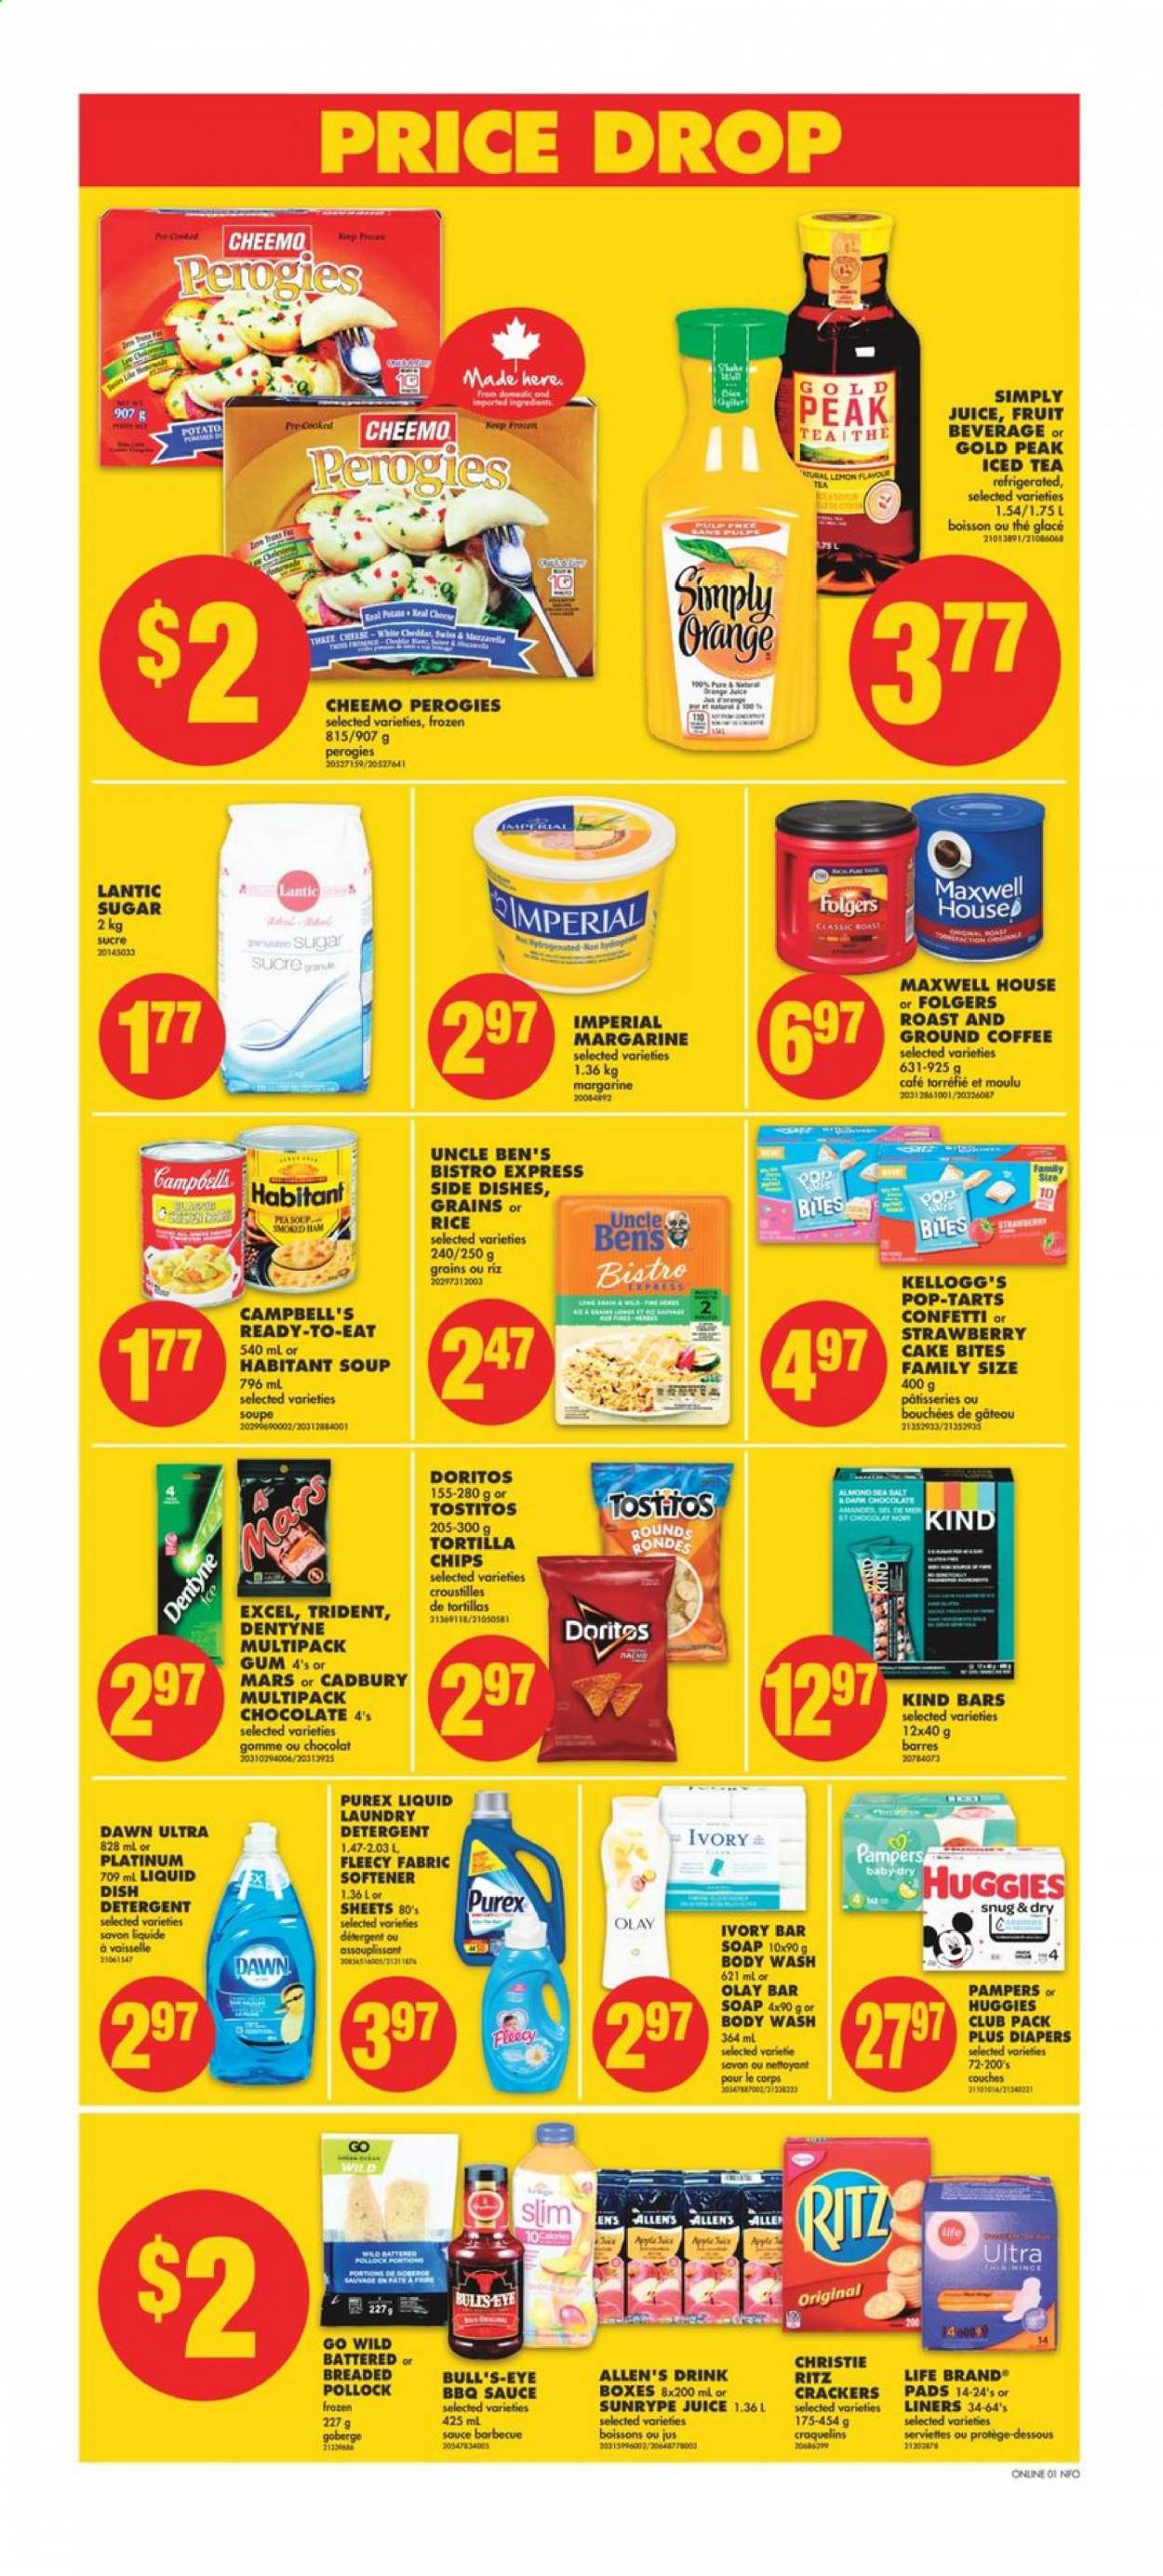 thumbnail - No Frills Flyer - May 13, 2021 - May 19, 2021 - Sales products - cake, pollock, Campbell's, soup, sauce, ham, cheese, margarine, chocolate, Mars, crackers, Kellogg's, Cadbury, Trident, Pop-Tarts, RITZ, Doritos, tortilla chips, Tostitos, sugar, Uncle Ben's, rice, BBQ sauce, juice, ice tea, Maxwell House, coffee, Folgers, ground coffee, L'Or, nappies, fabric softener, laundry detergent, Purex, body wash, soap bar, soap, Olay, Huggies, Pampers. Page 6.